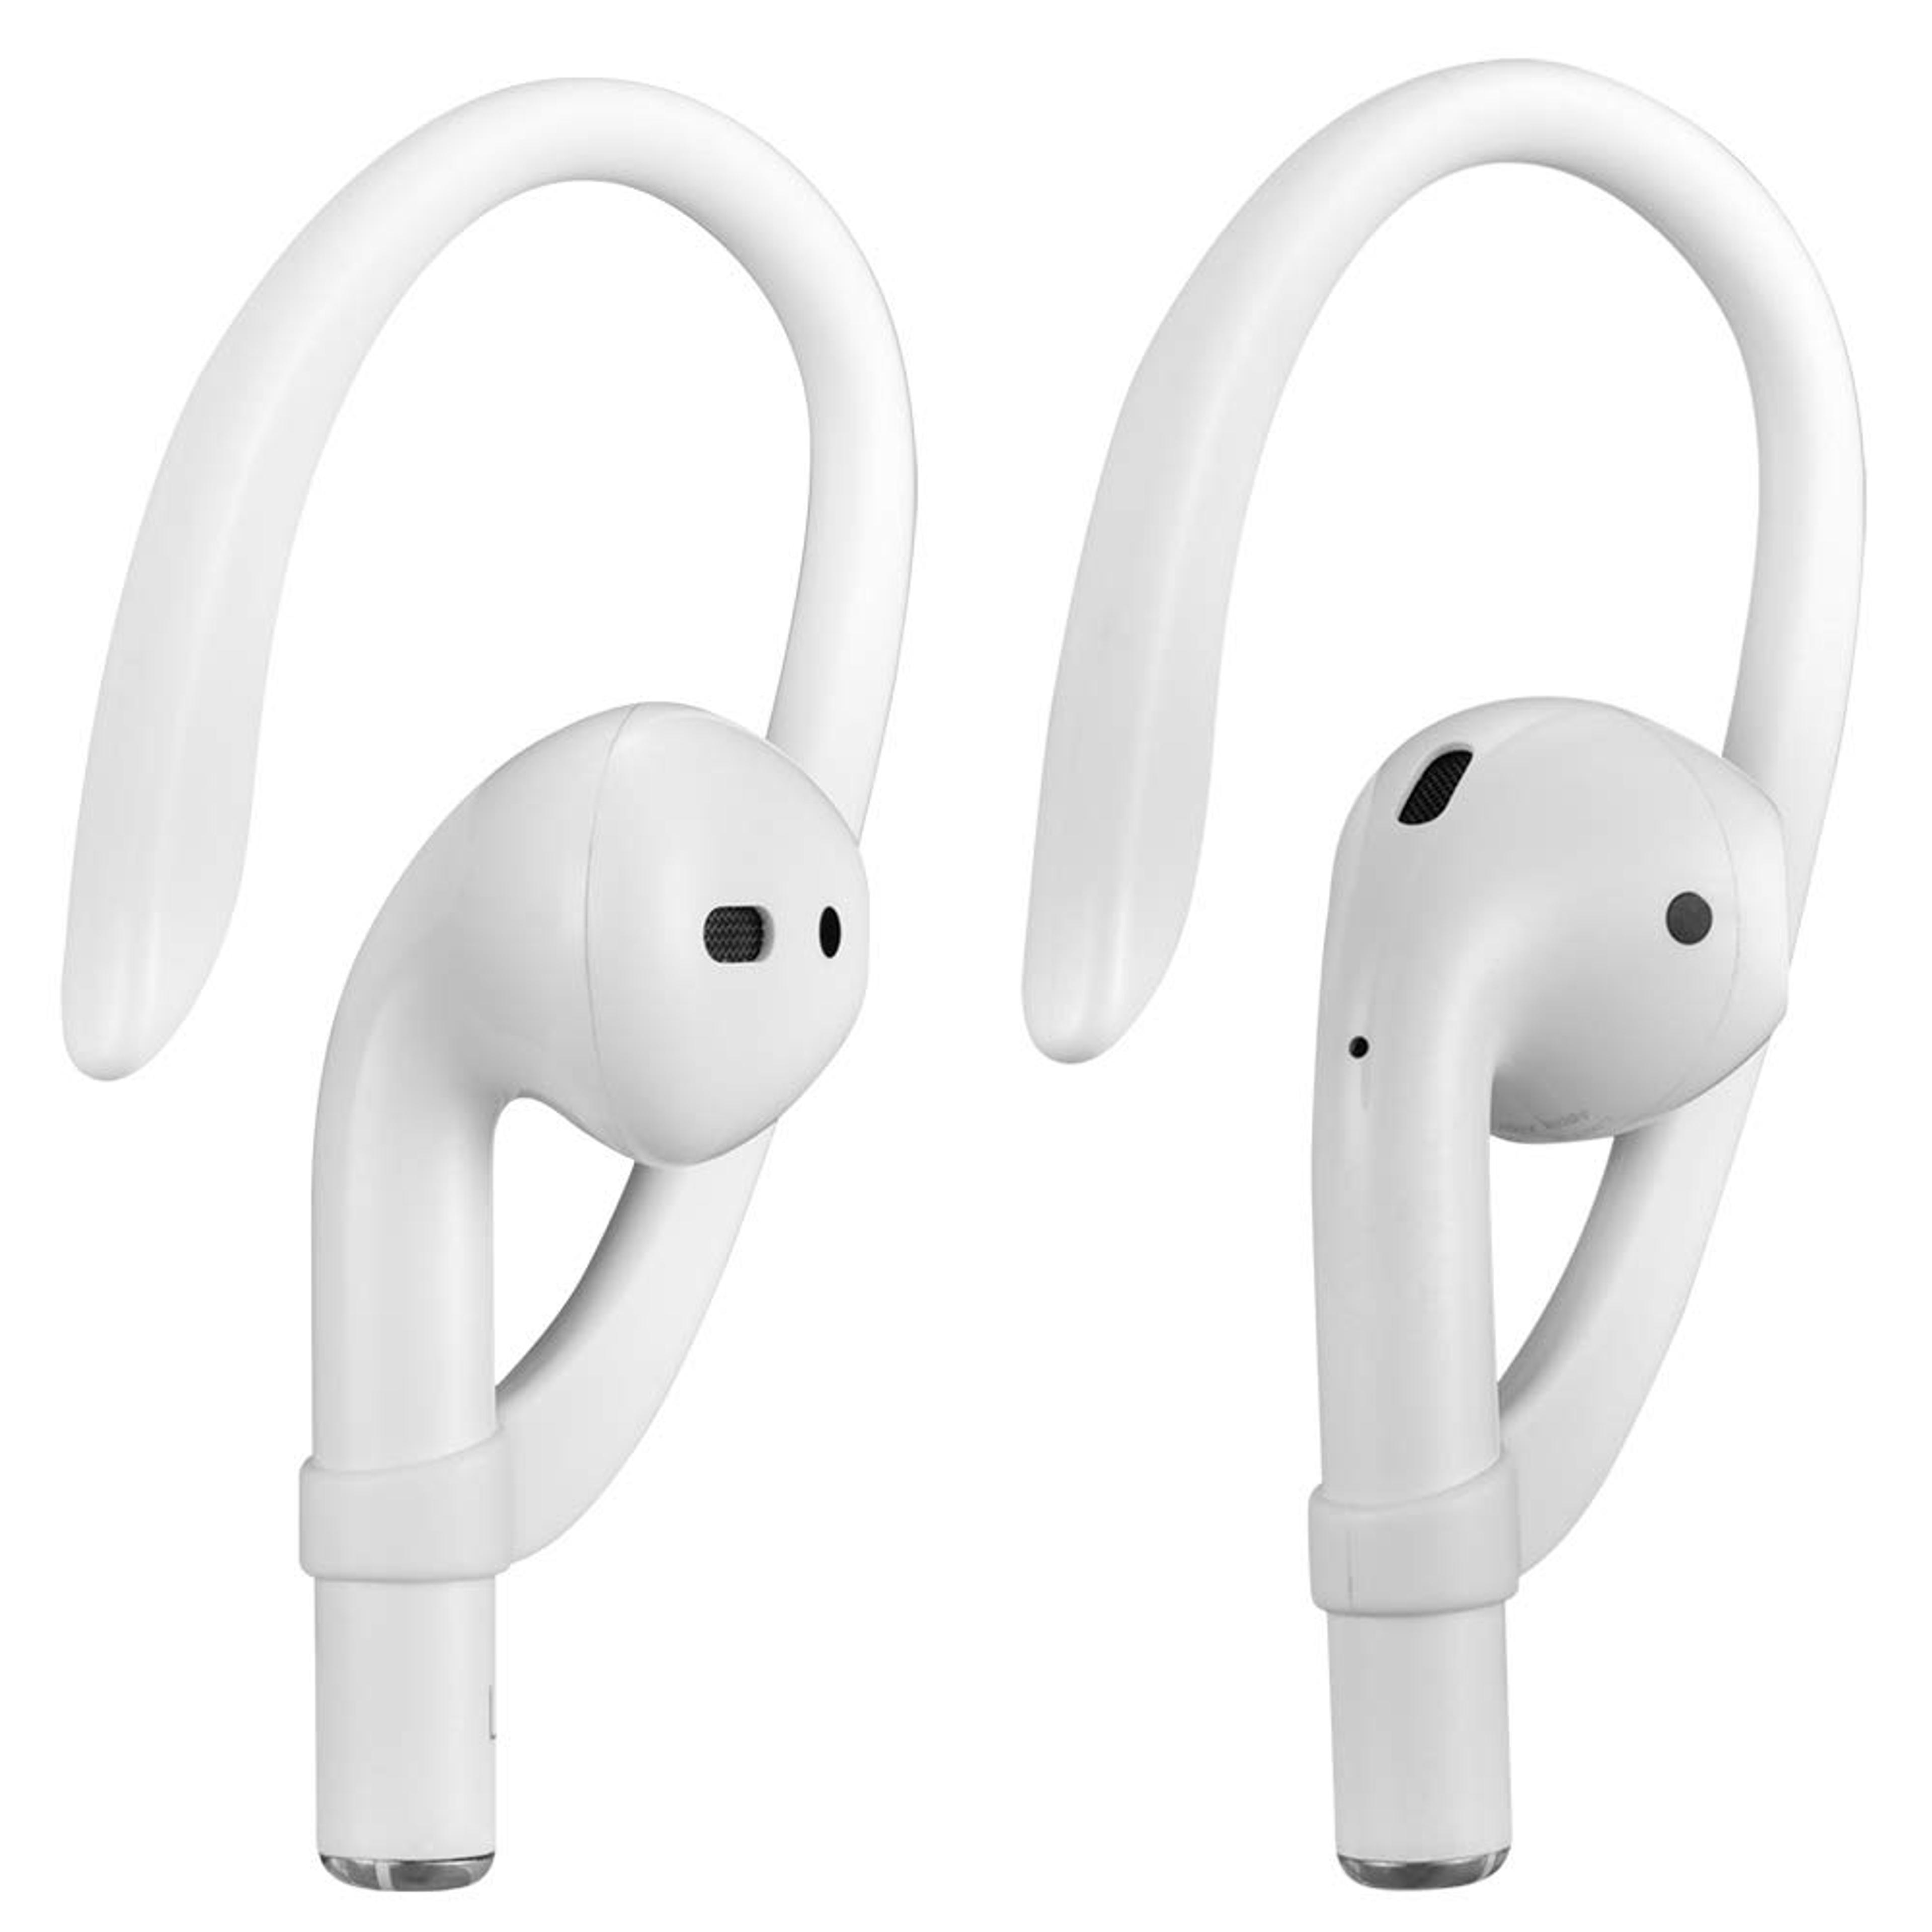 AirPods Ear Hooks Compatible with Apple AirPods 1, 2, 3 and Pro, Xoomz Anti-Slip Sports Ear Hooks for AirPods 1, 2, 3 and Pro - White